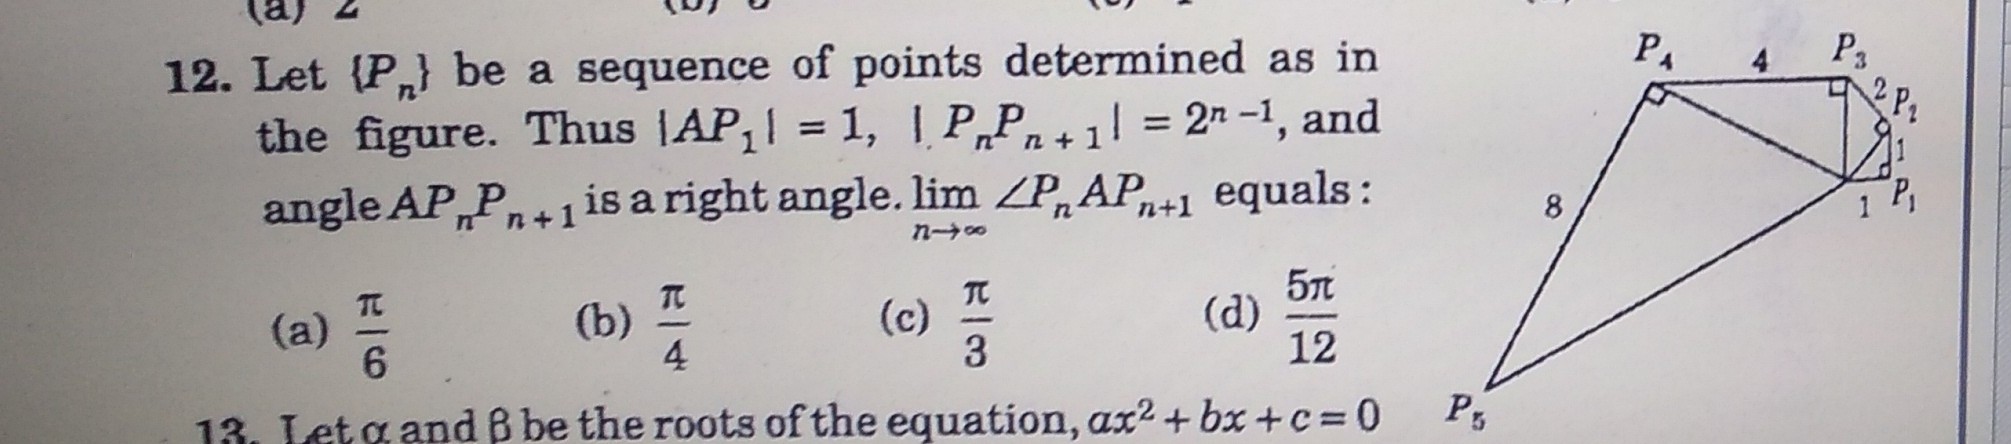 12. Let {P,} be a sequence of points determined as in
the figure. Thus |AP,| = 1, | P„Pn + 1 = 2" -1, and
angle AP„P,+1 is a right angle. lim ZP,A
P3
%D
%D
n+1 equals:
8.
TC
(a)
6.
TC
(b)
4
57
(d)
12
(c)
